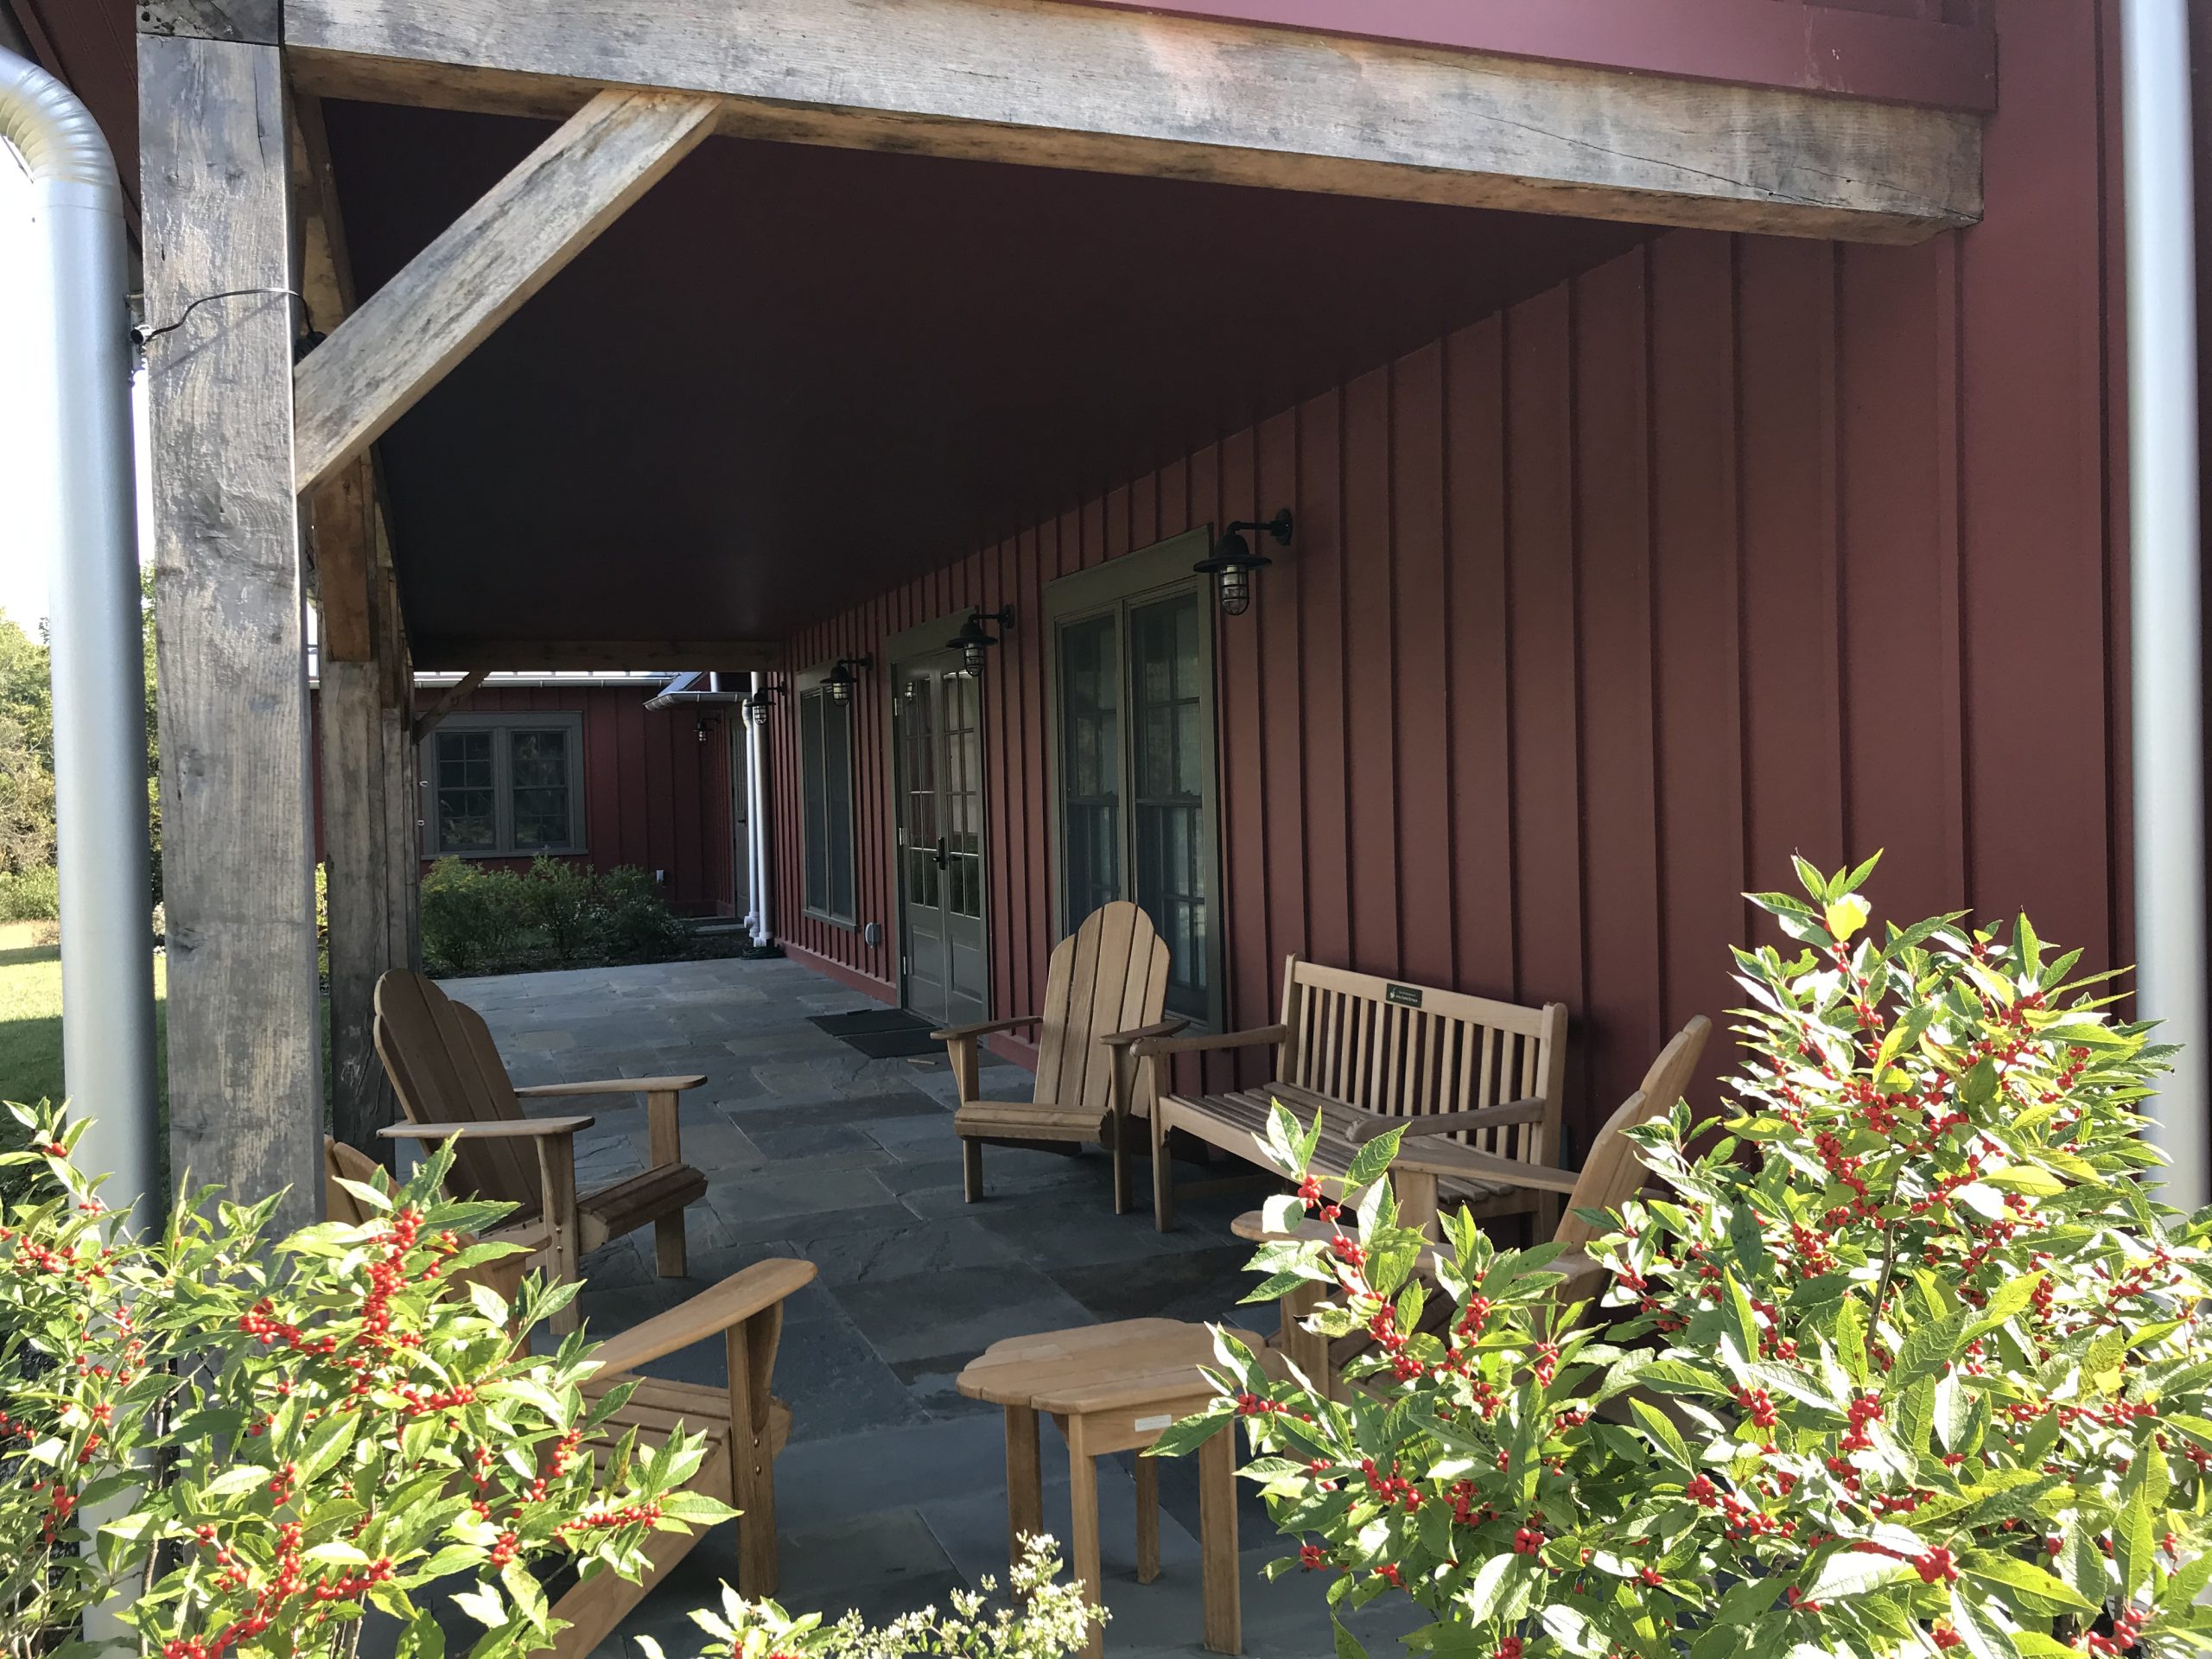 Our porch is open for serving, seating or socializing